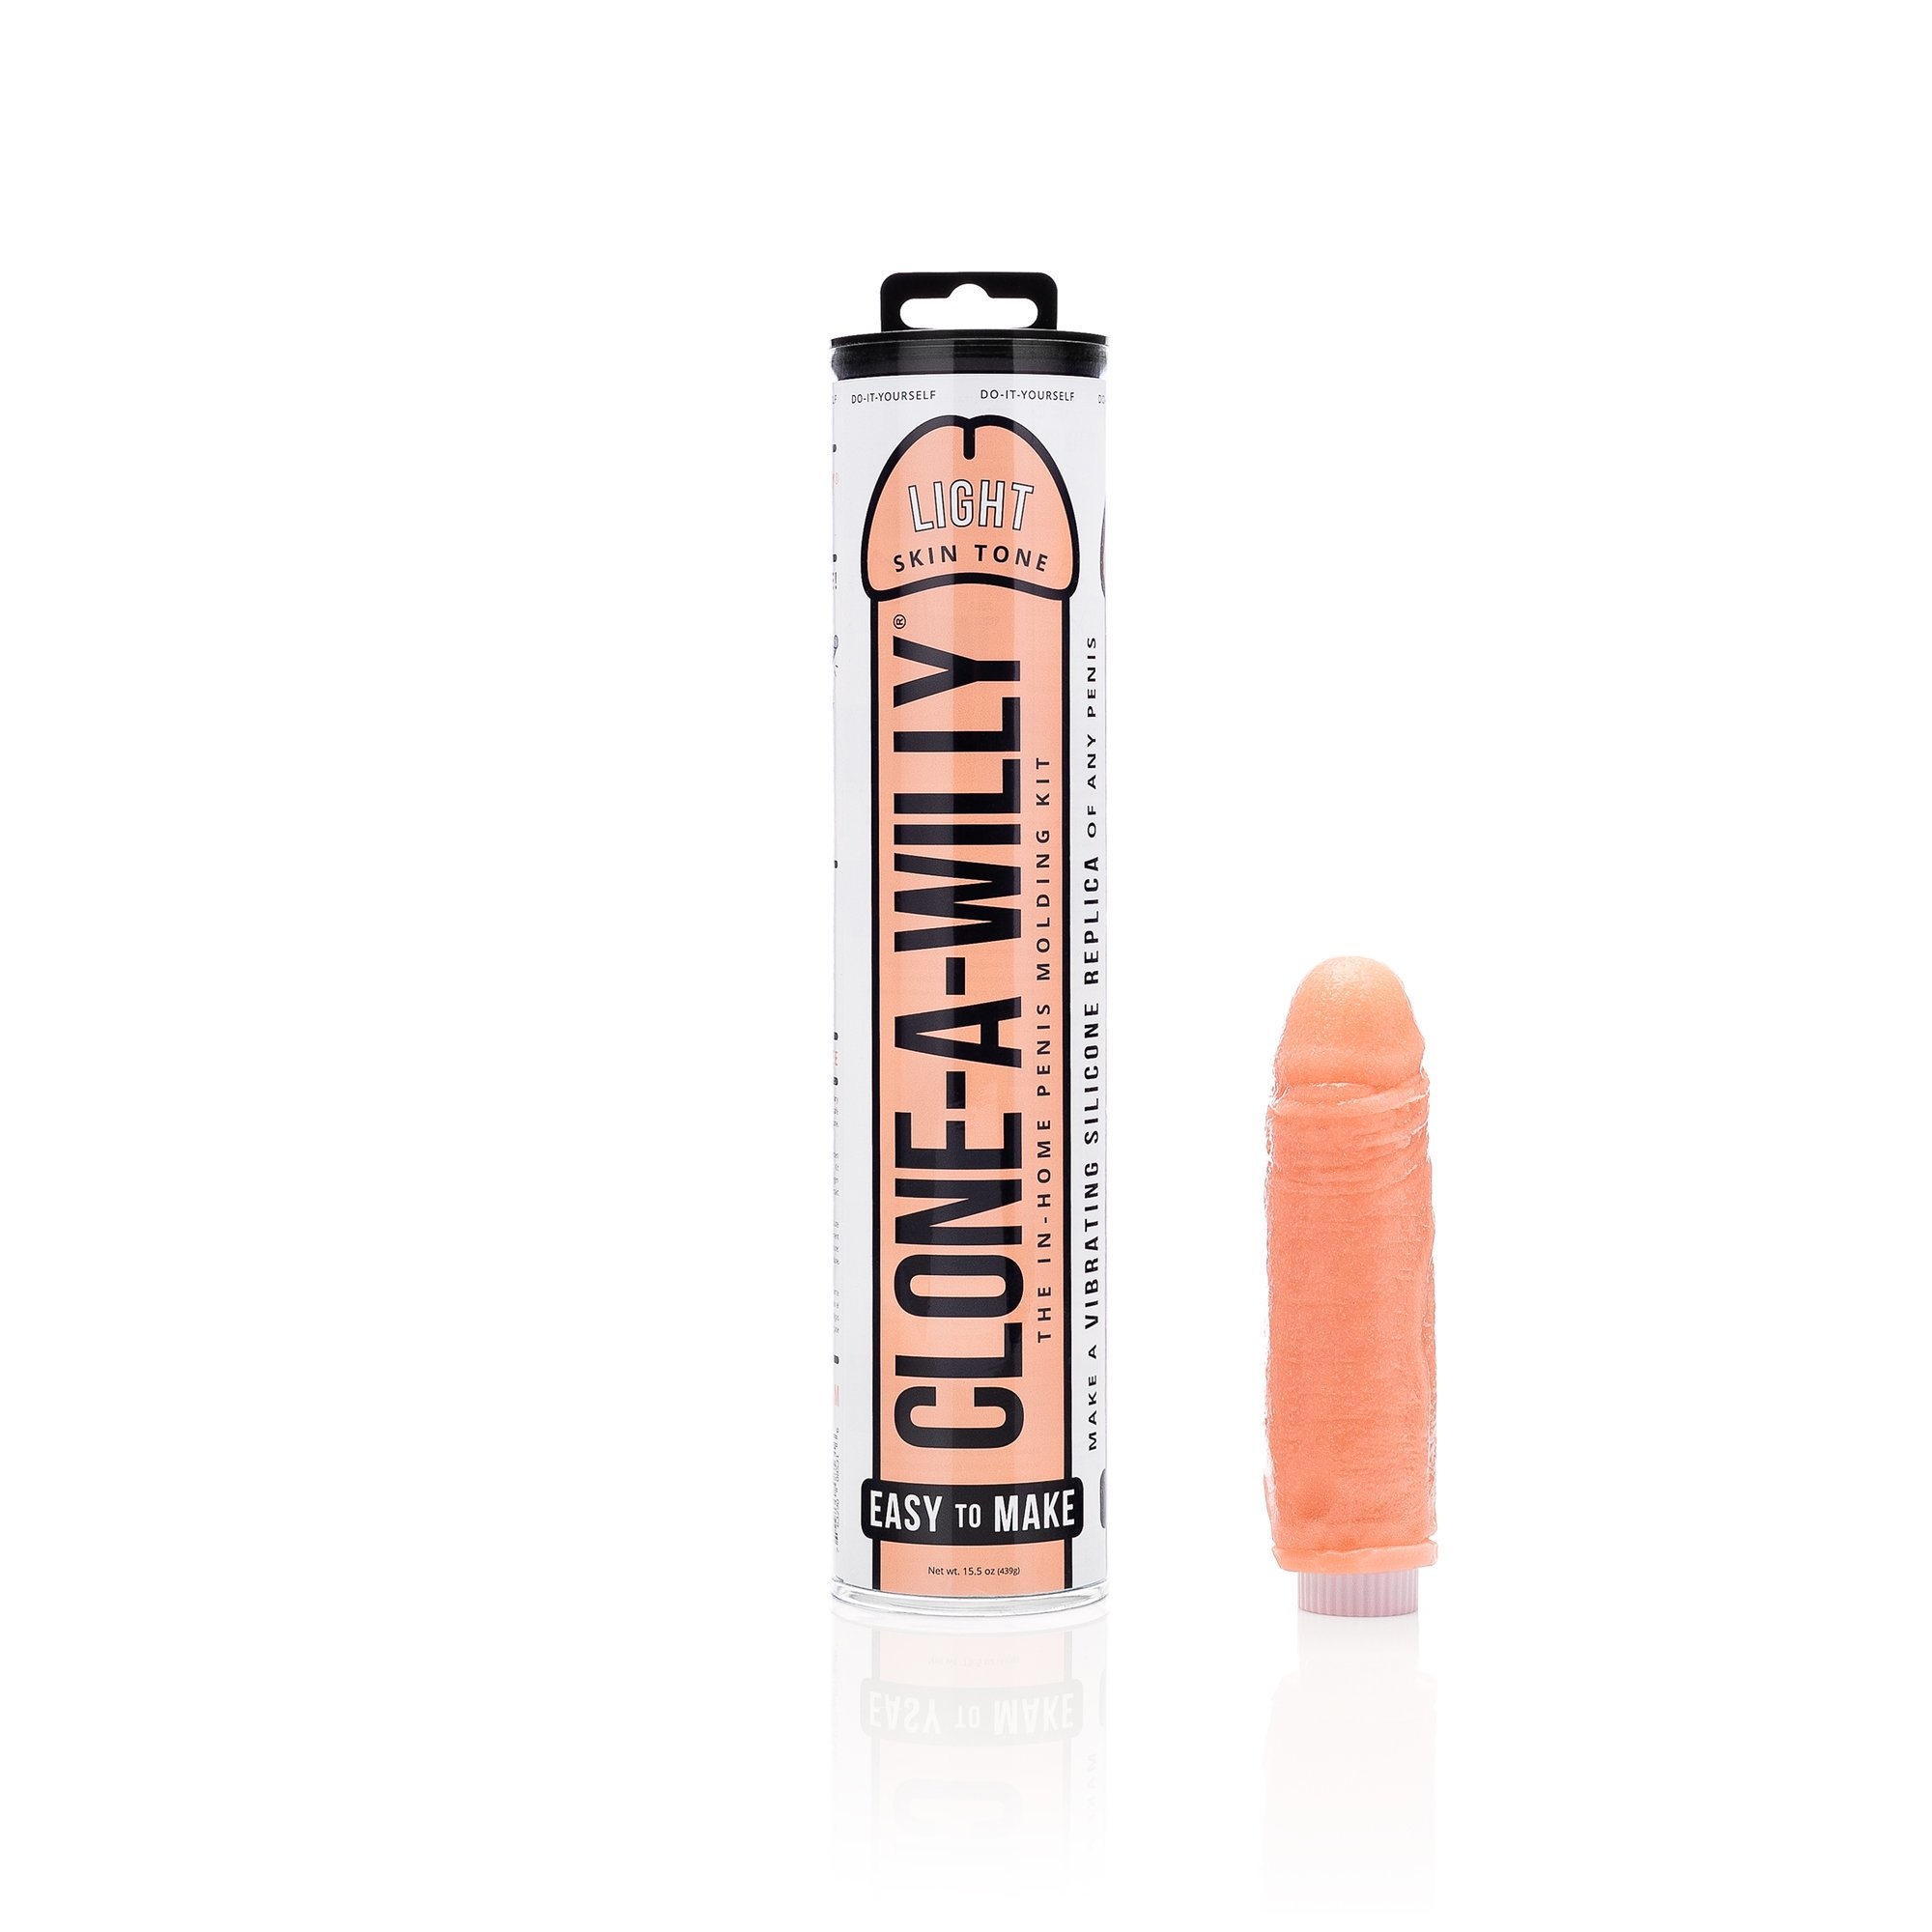 Clone-A-Willy Vibrator Dildo Kit - Hot Pink